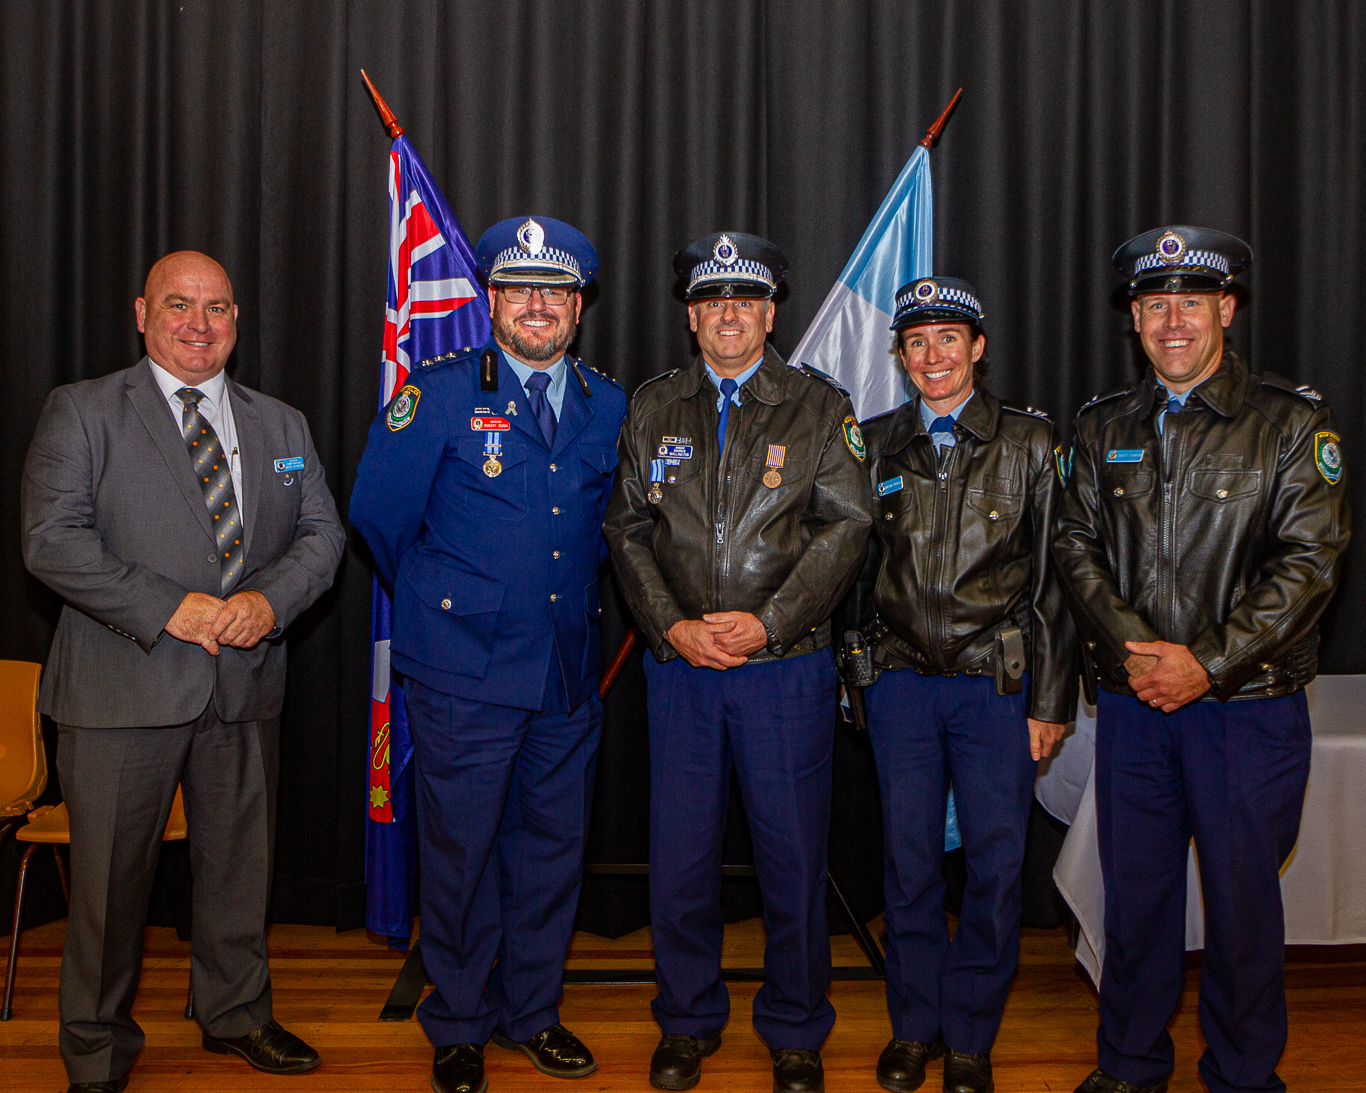 Police service recognised at ceremony